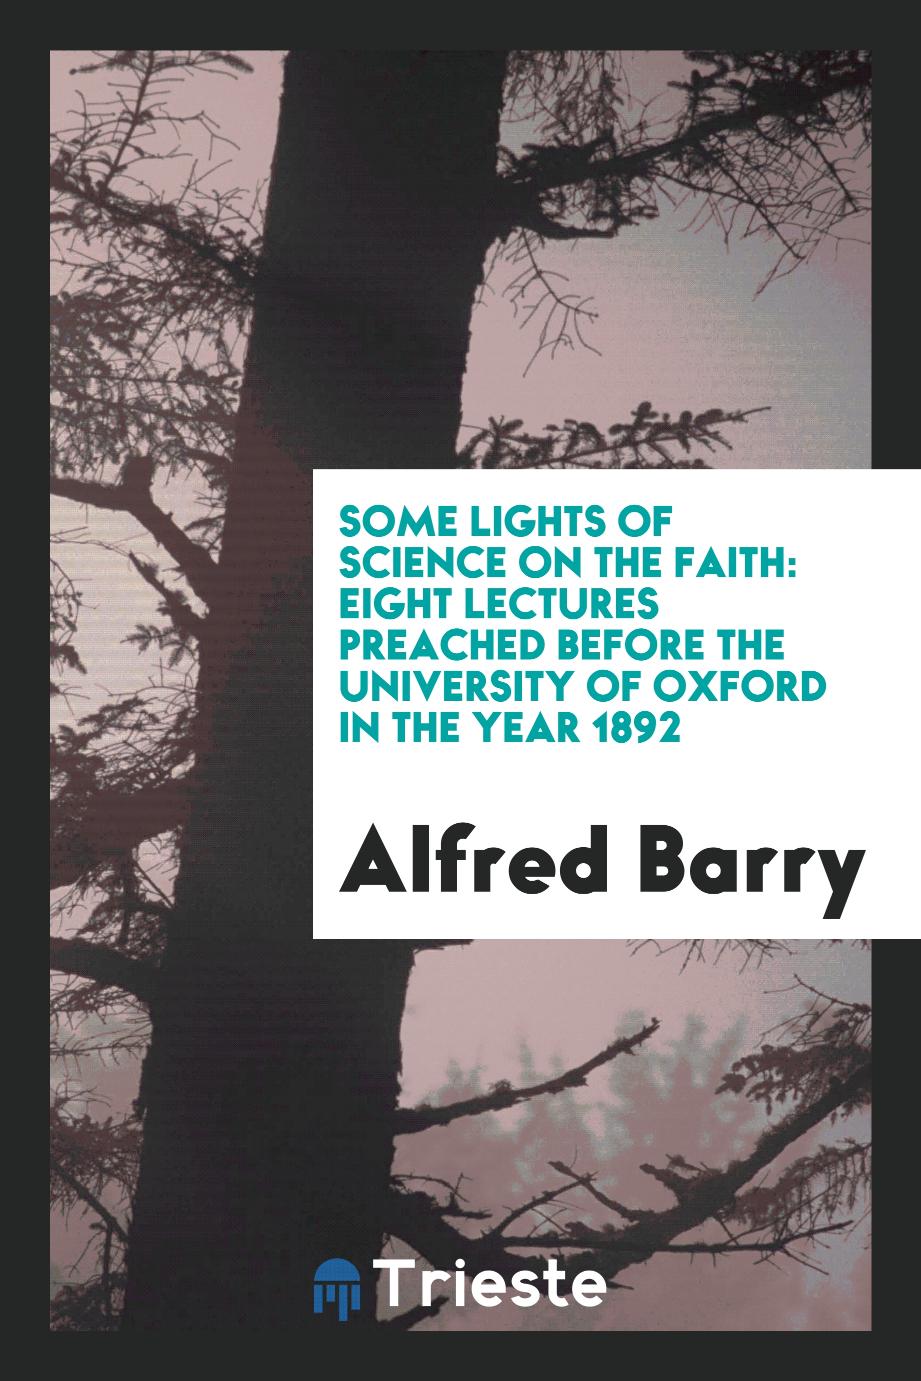 Some Lights of Science on the Faith: Eight Lectures Preached Before the University of Oxford in the Year 1892